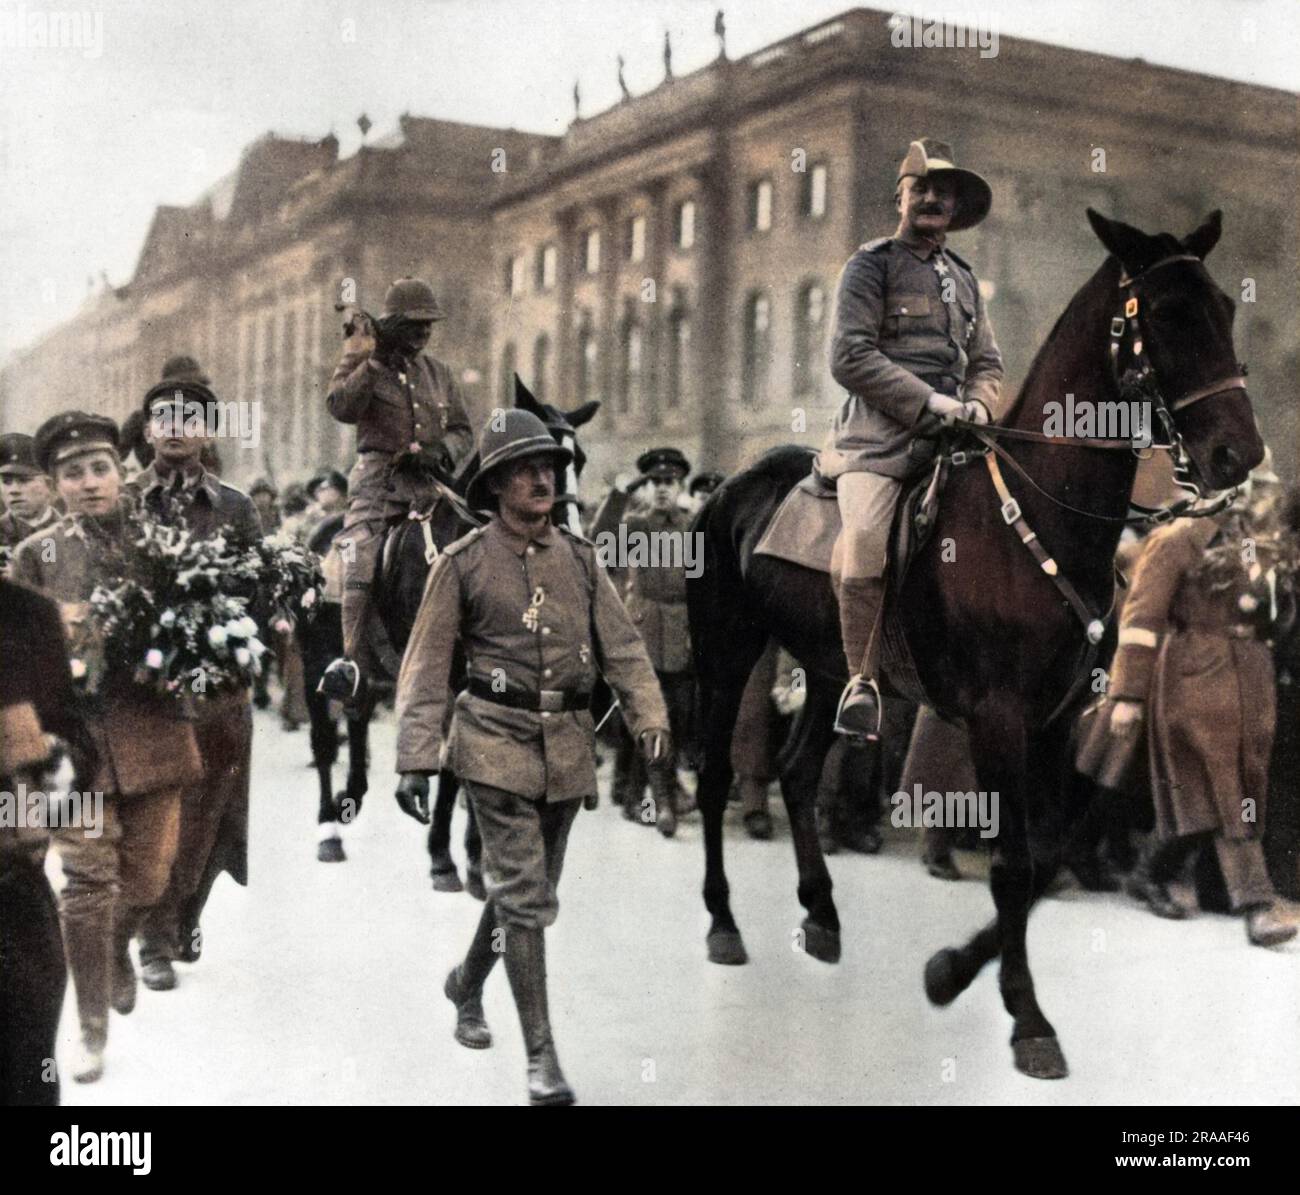 Paul Emil von Lettow-Vorbeck (1870-1964), general in the Imperial German Army and commander of the German East Africa Campaign during the First World War.  Seen here on horseback in a parade, returning to Berlin after the war.     Date: 02-Mar-19 Stock Photo